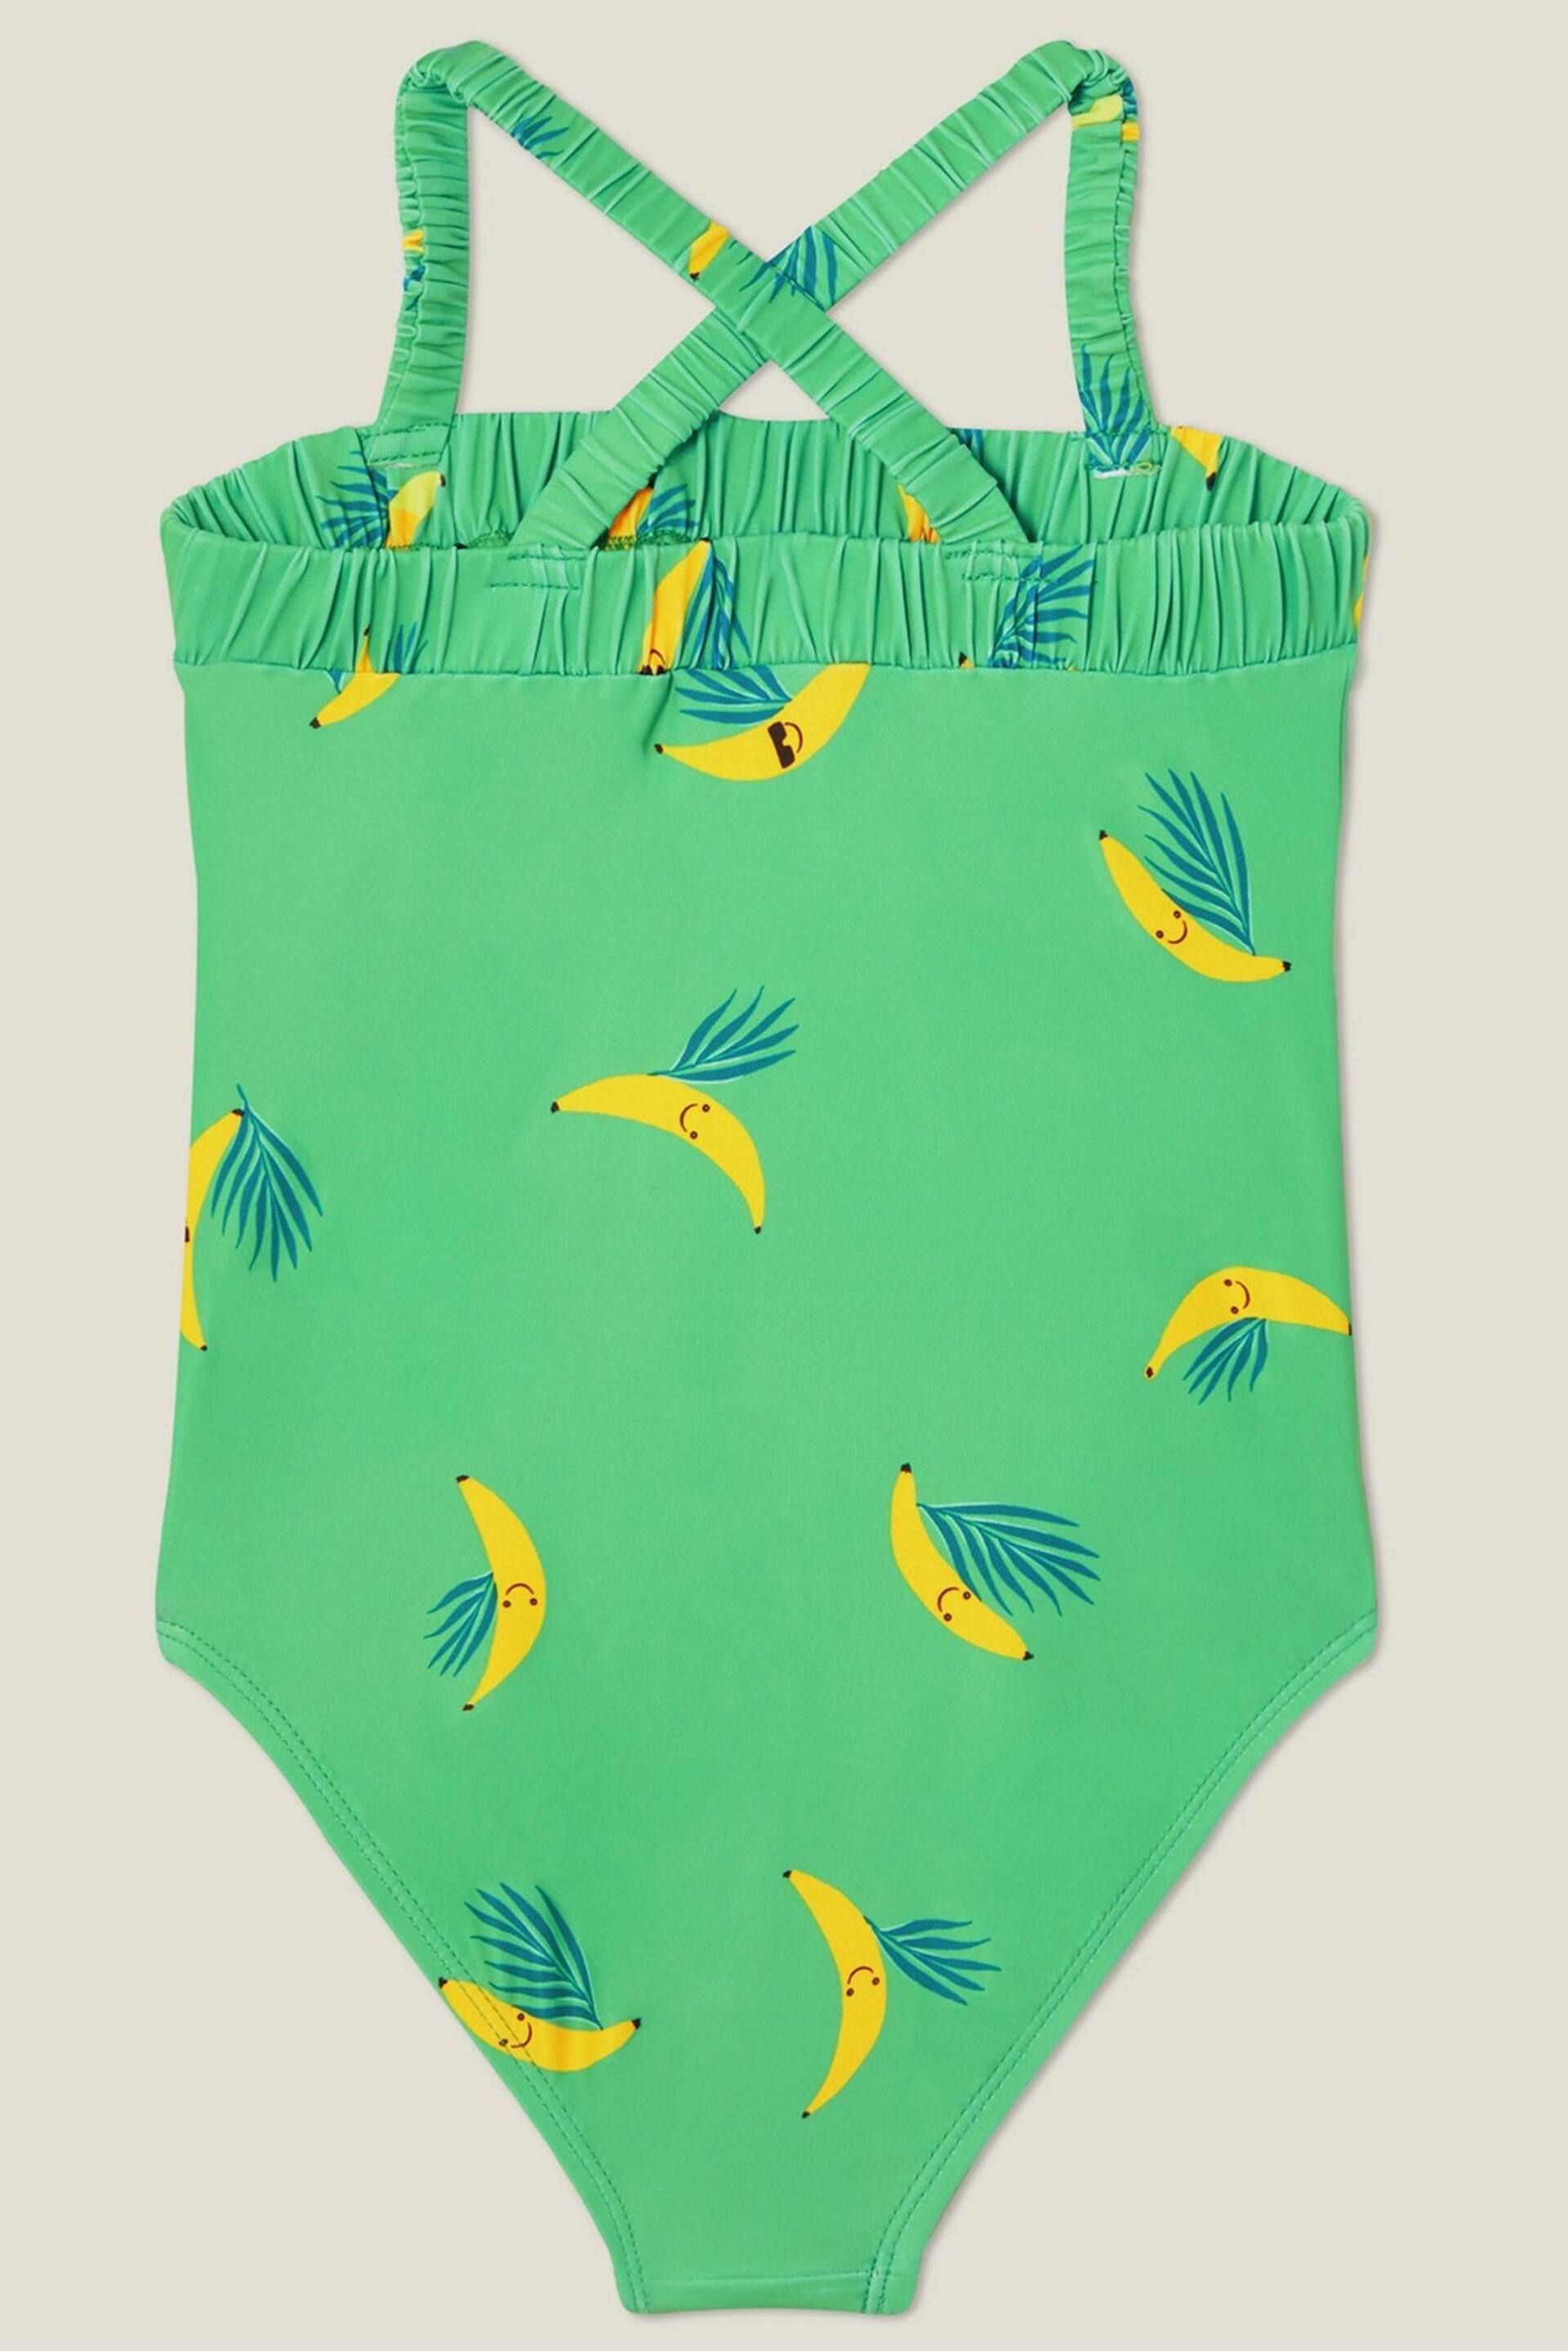 Angels By Accessorize Green Banana Print Swimsuit - Image 2 of 3